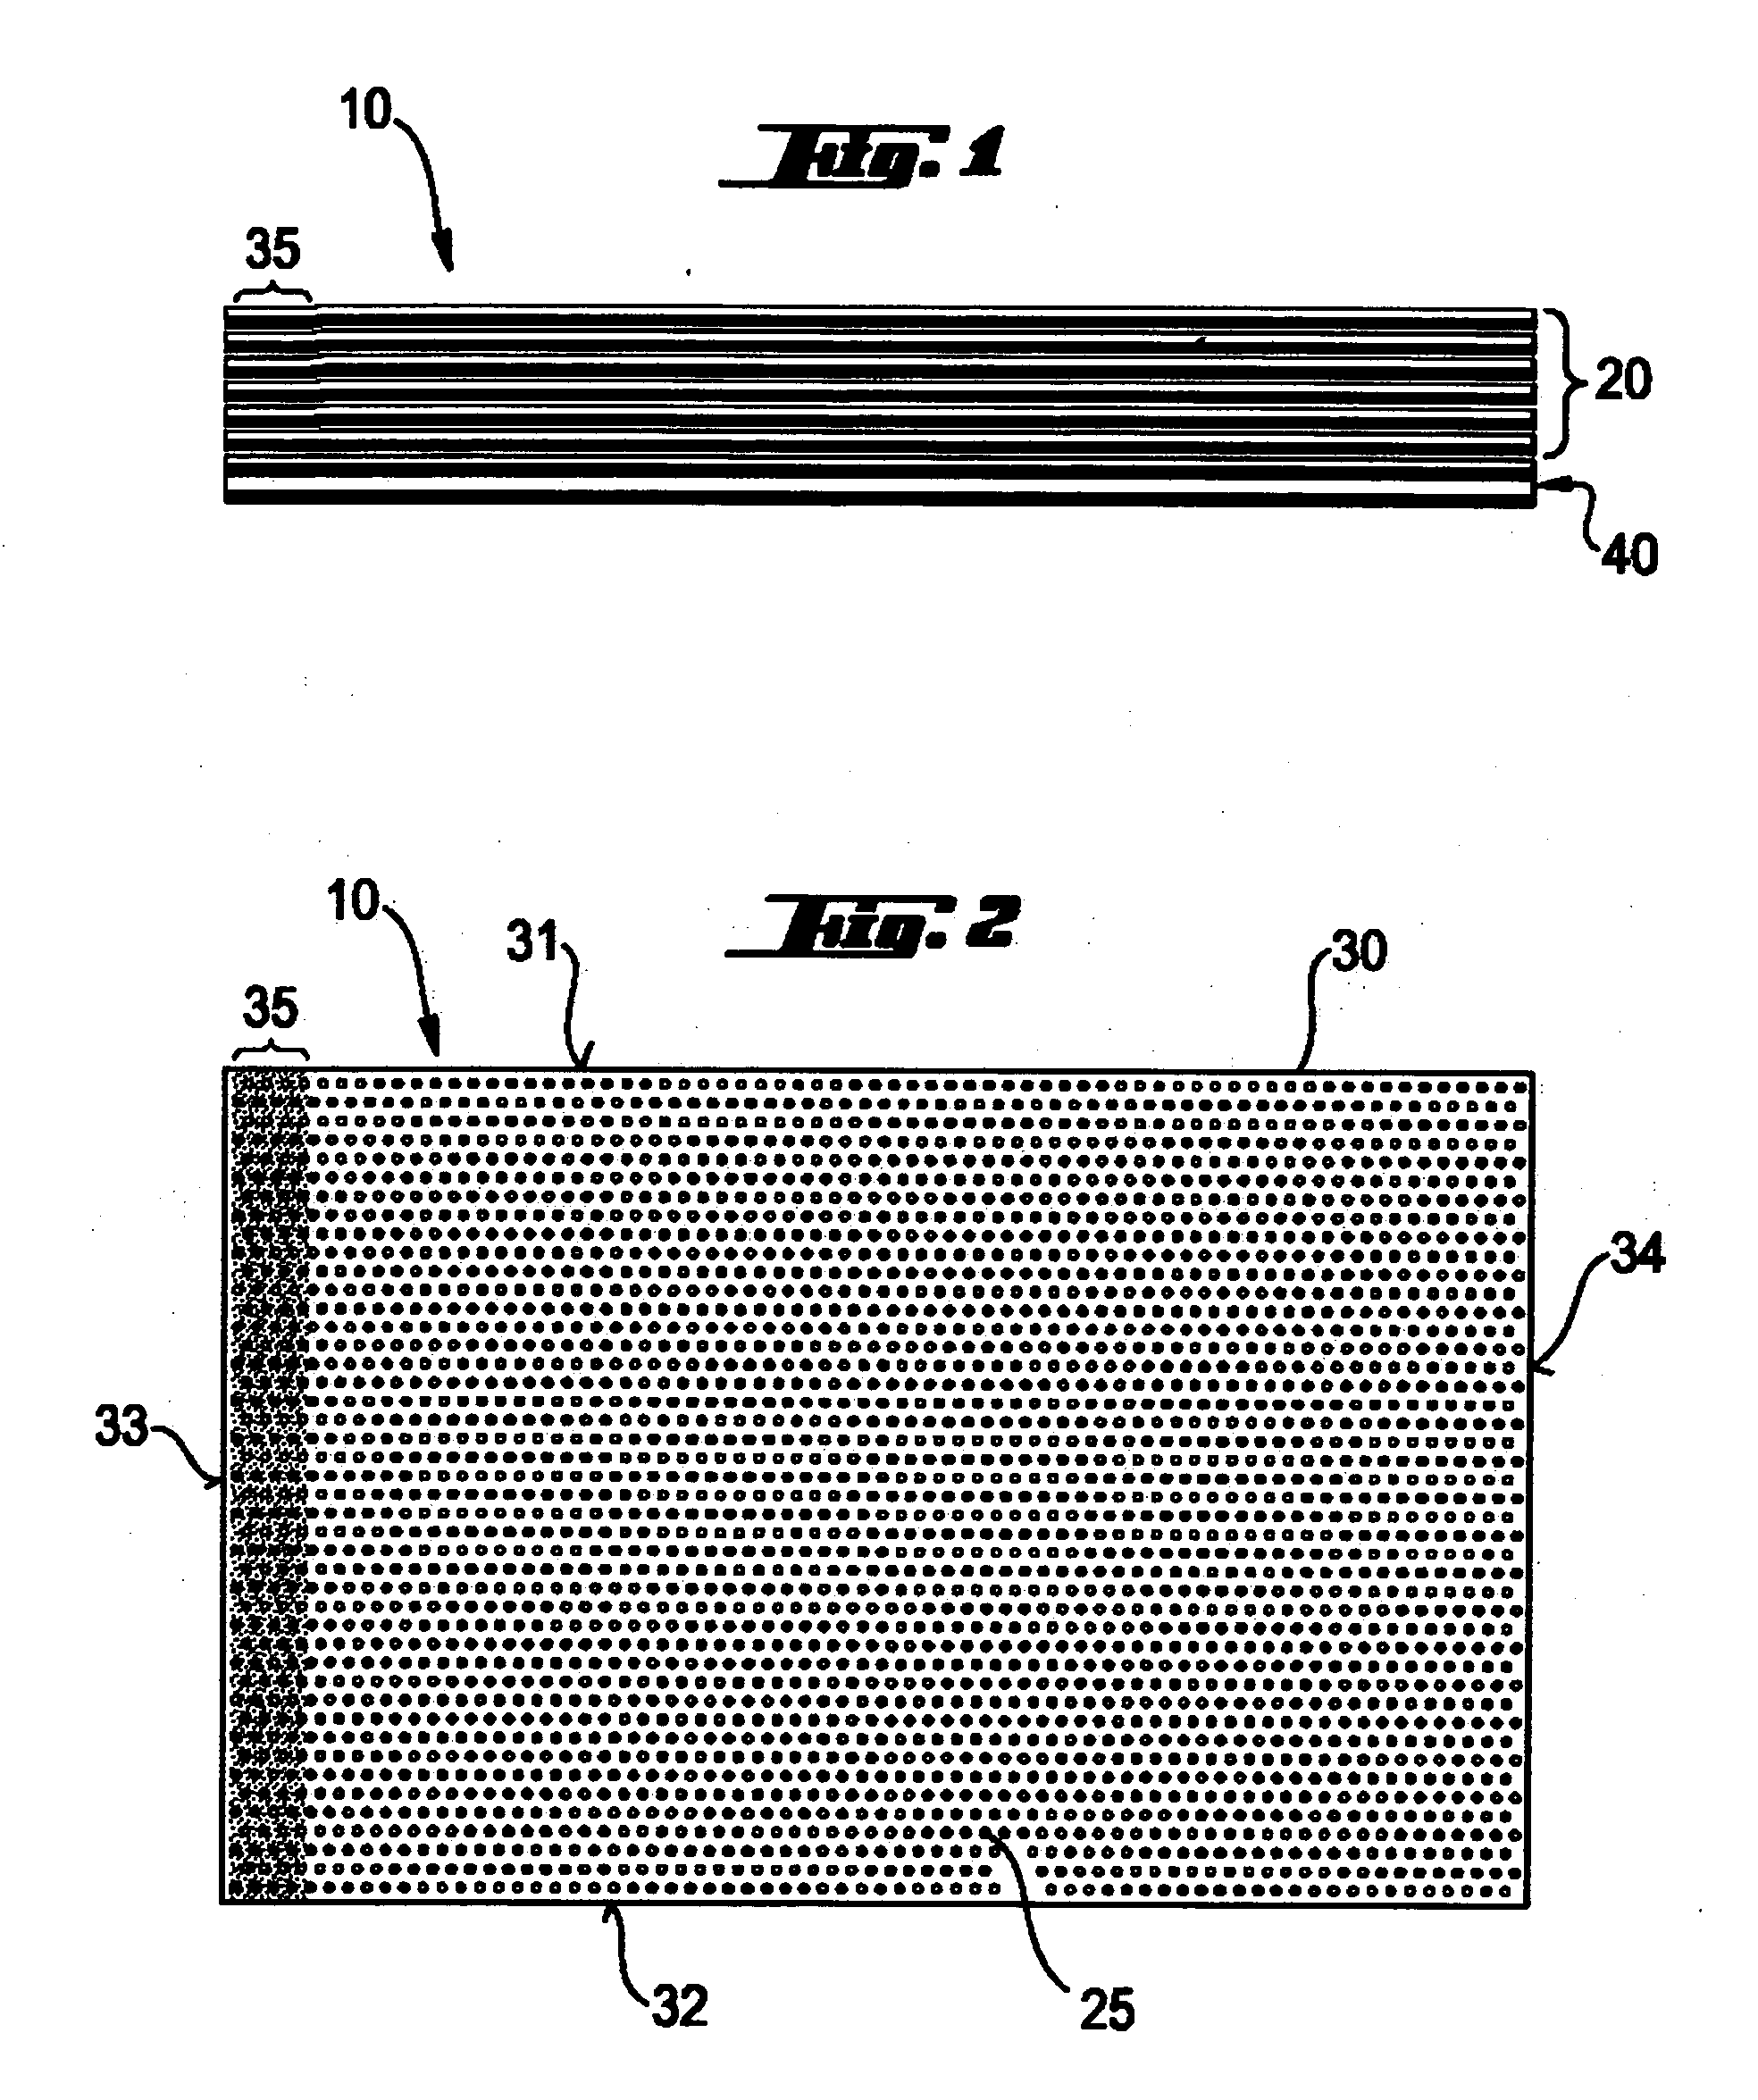 Disposable mat, a container comprising a disposable mat, and a method of promoting the sale of a disposable mat